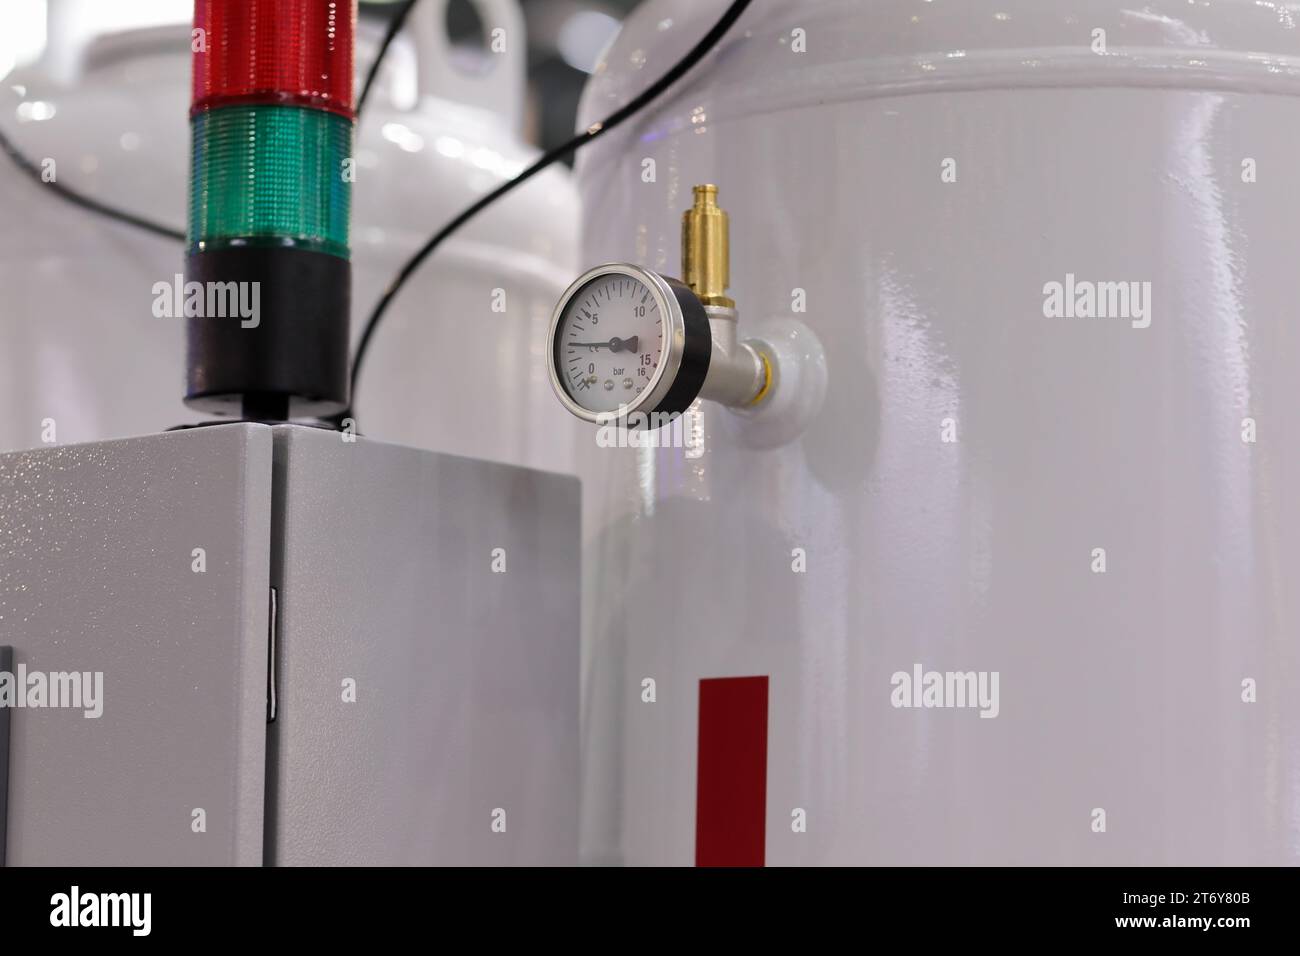 Industrial manufacturing equipment closeup concept. Gas cylinders with preswsure gauge. Control cabinet with tower signal lights. Selective focus. Stock Photo